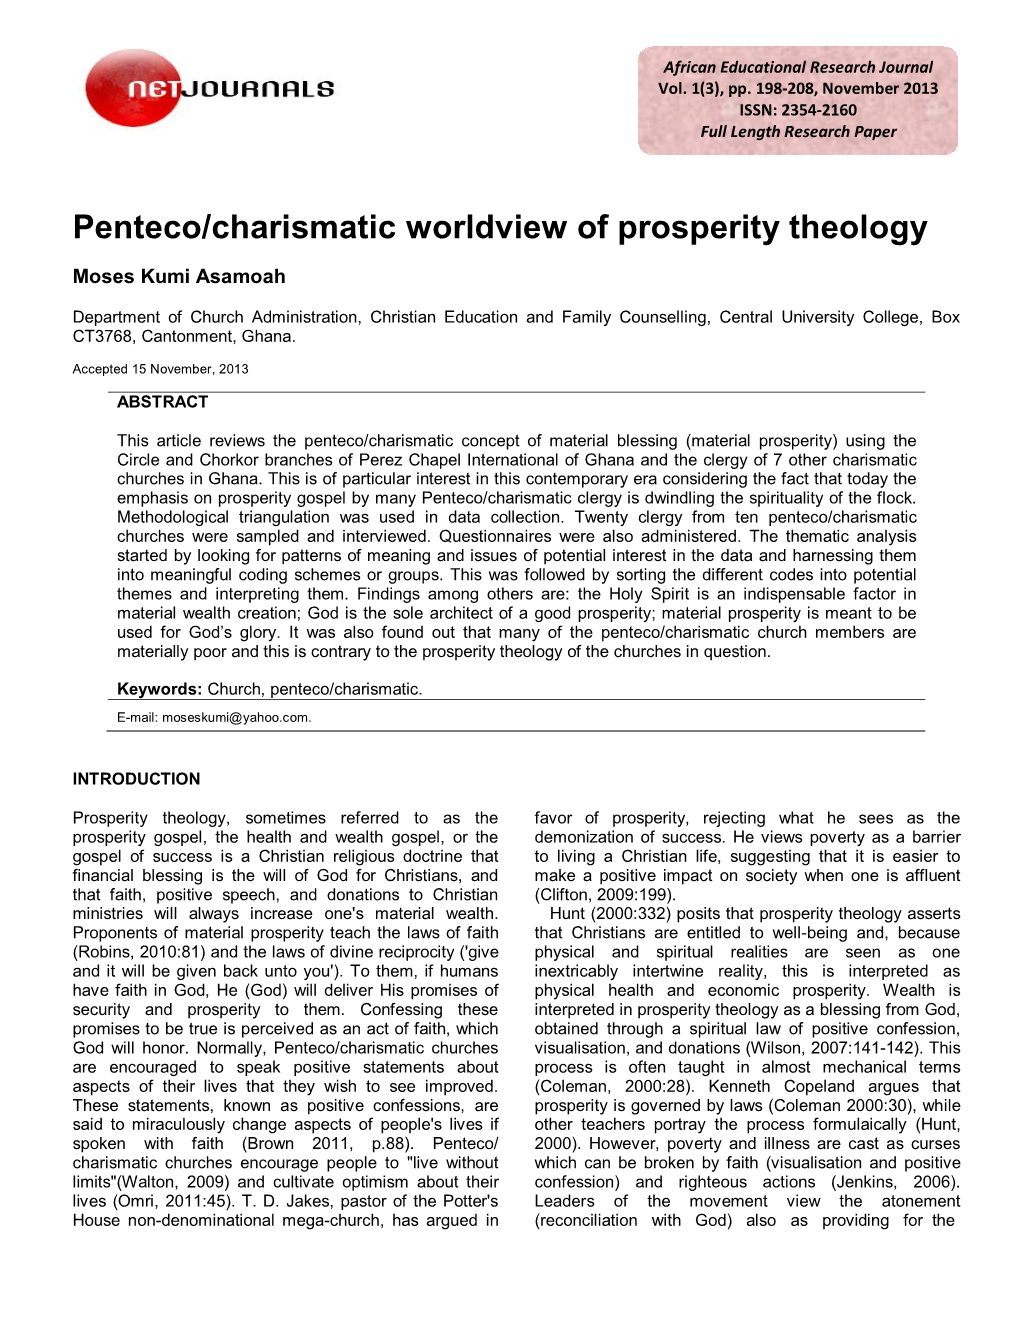 Penteco/Charismatic Worldview of Prosperity Theology